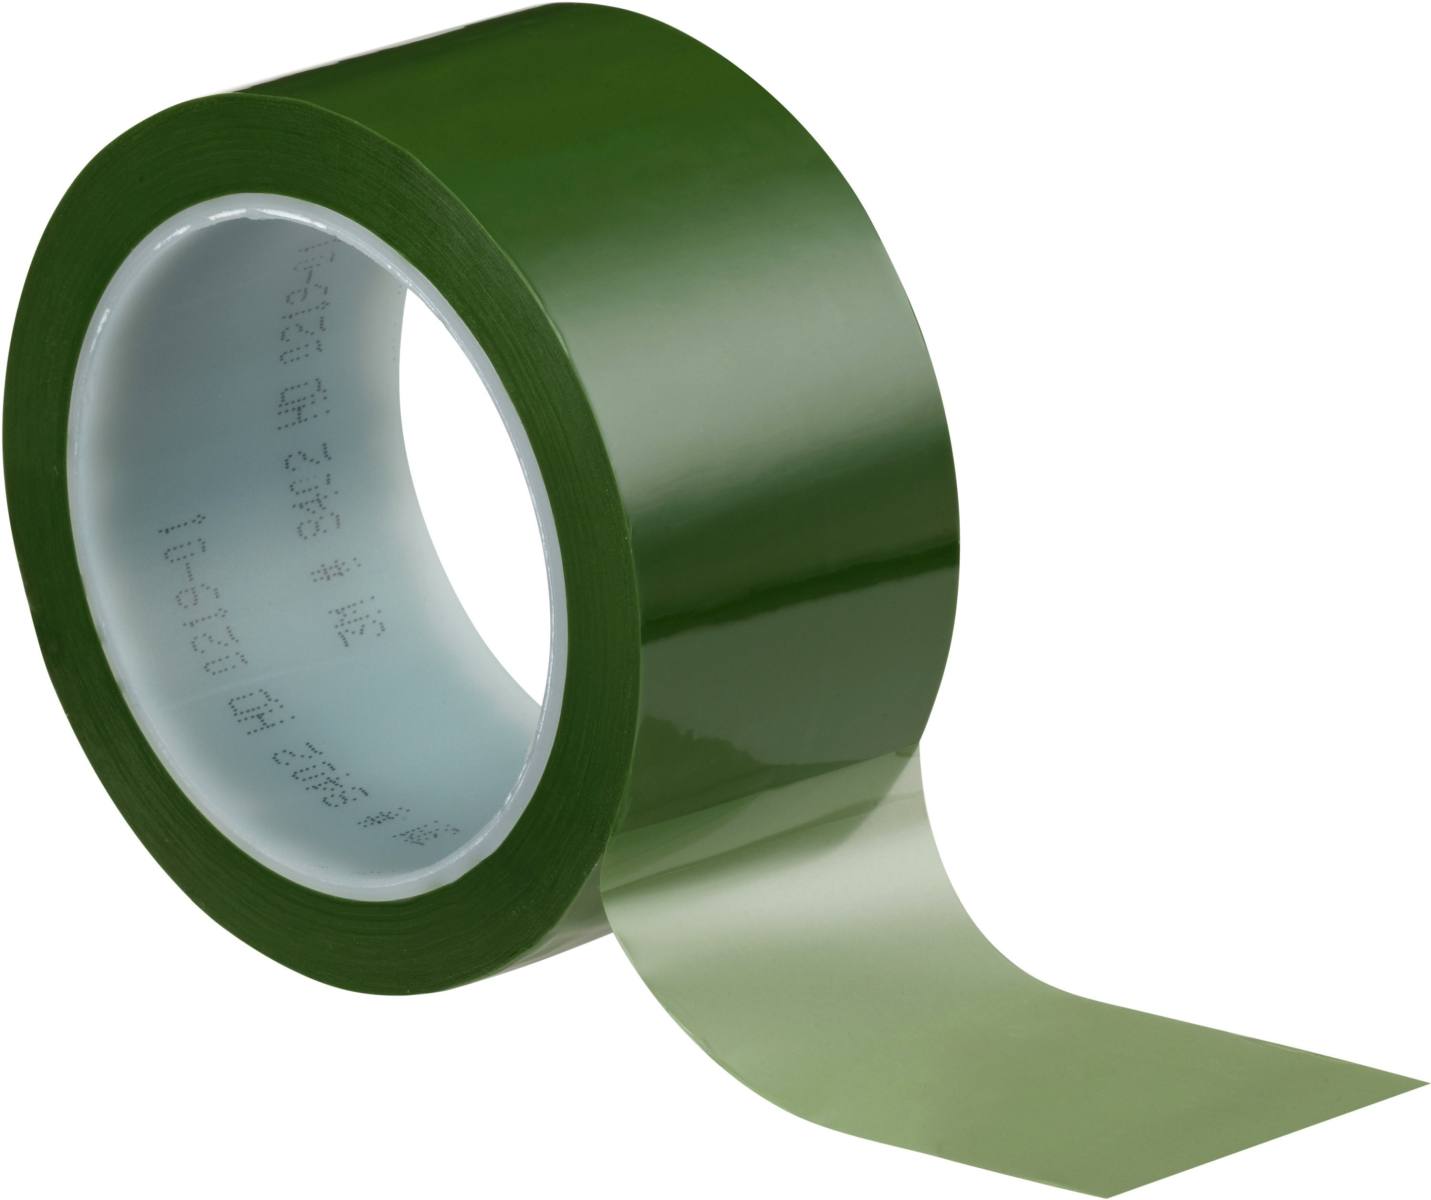 3M polyester adhesive tape 8402 12mmx66m green